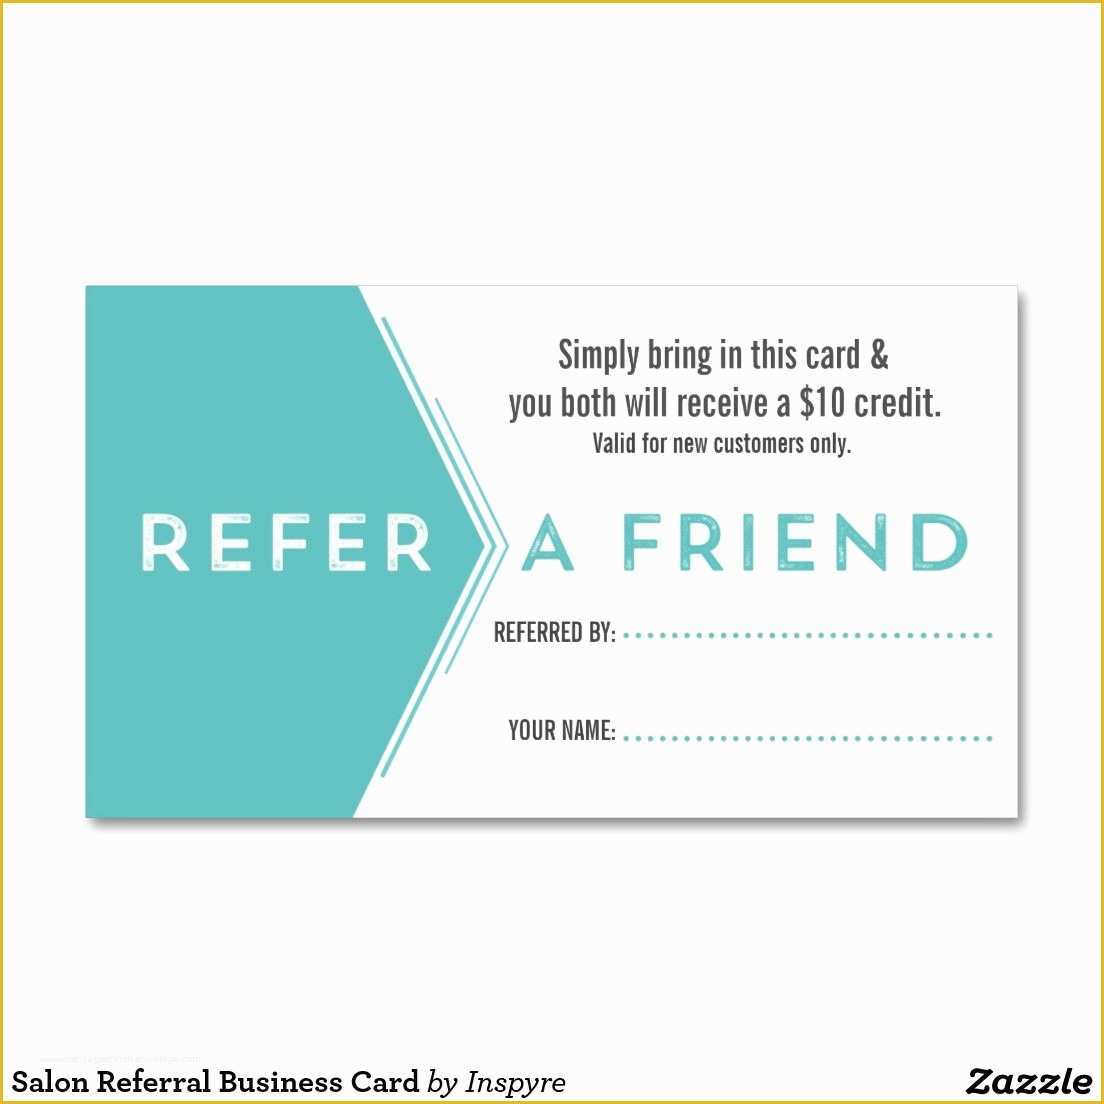 Refer A Friend Card Template Free Of Salon Referral Business Card Zazzle